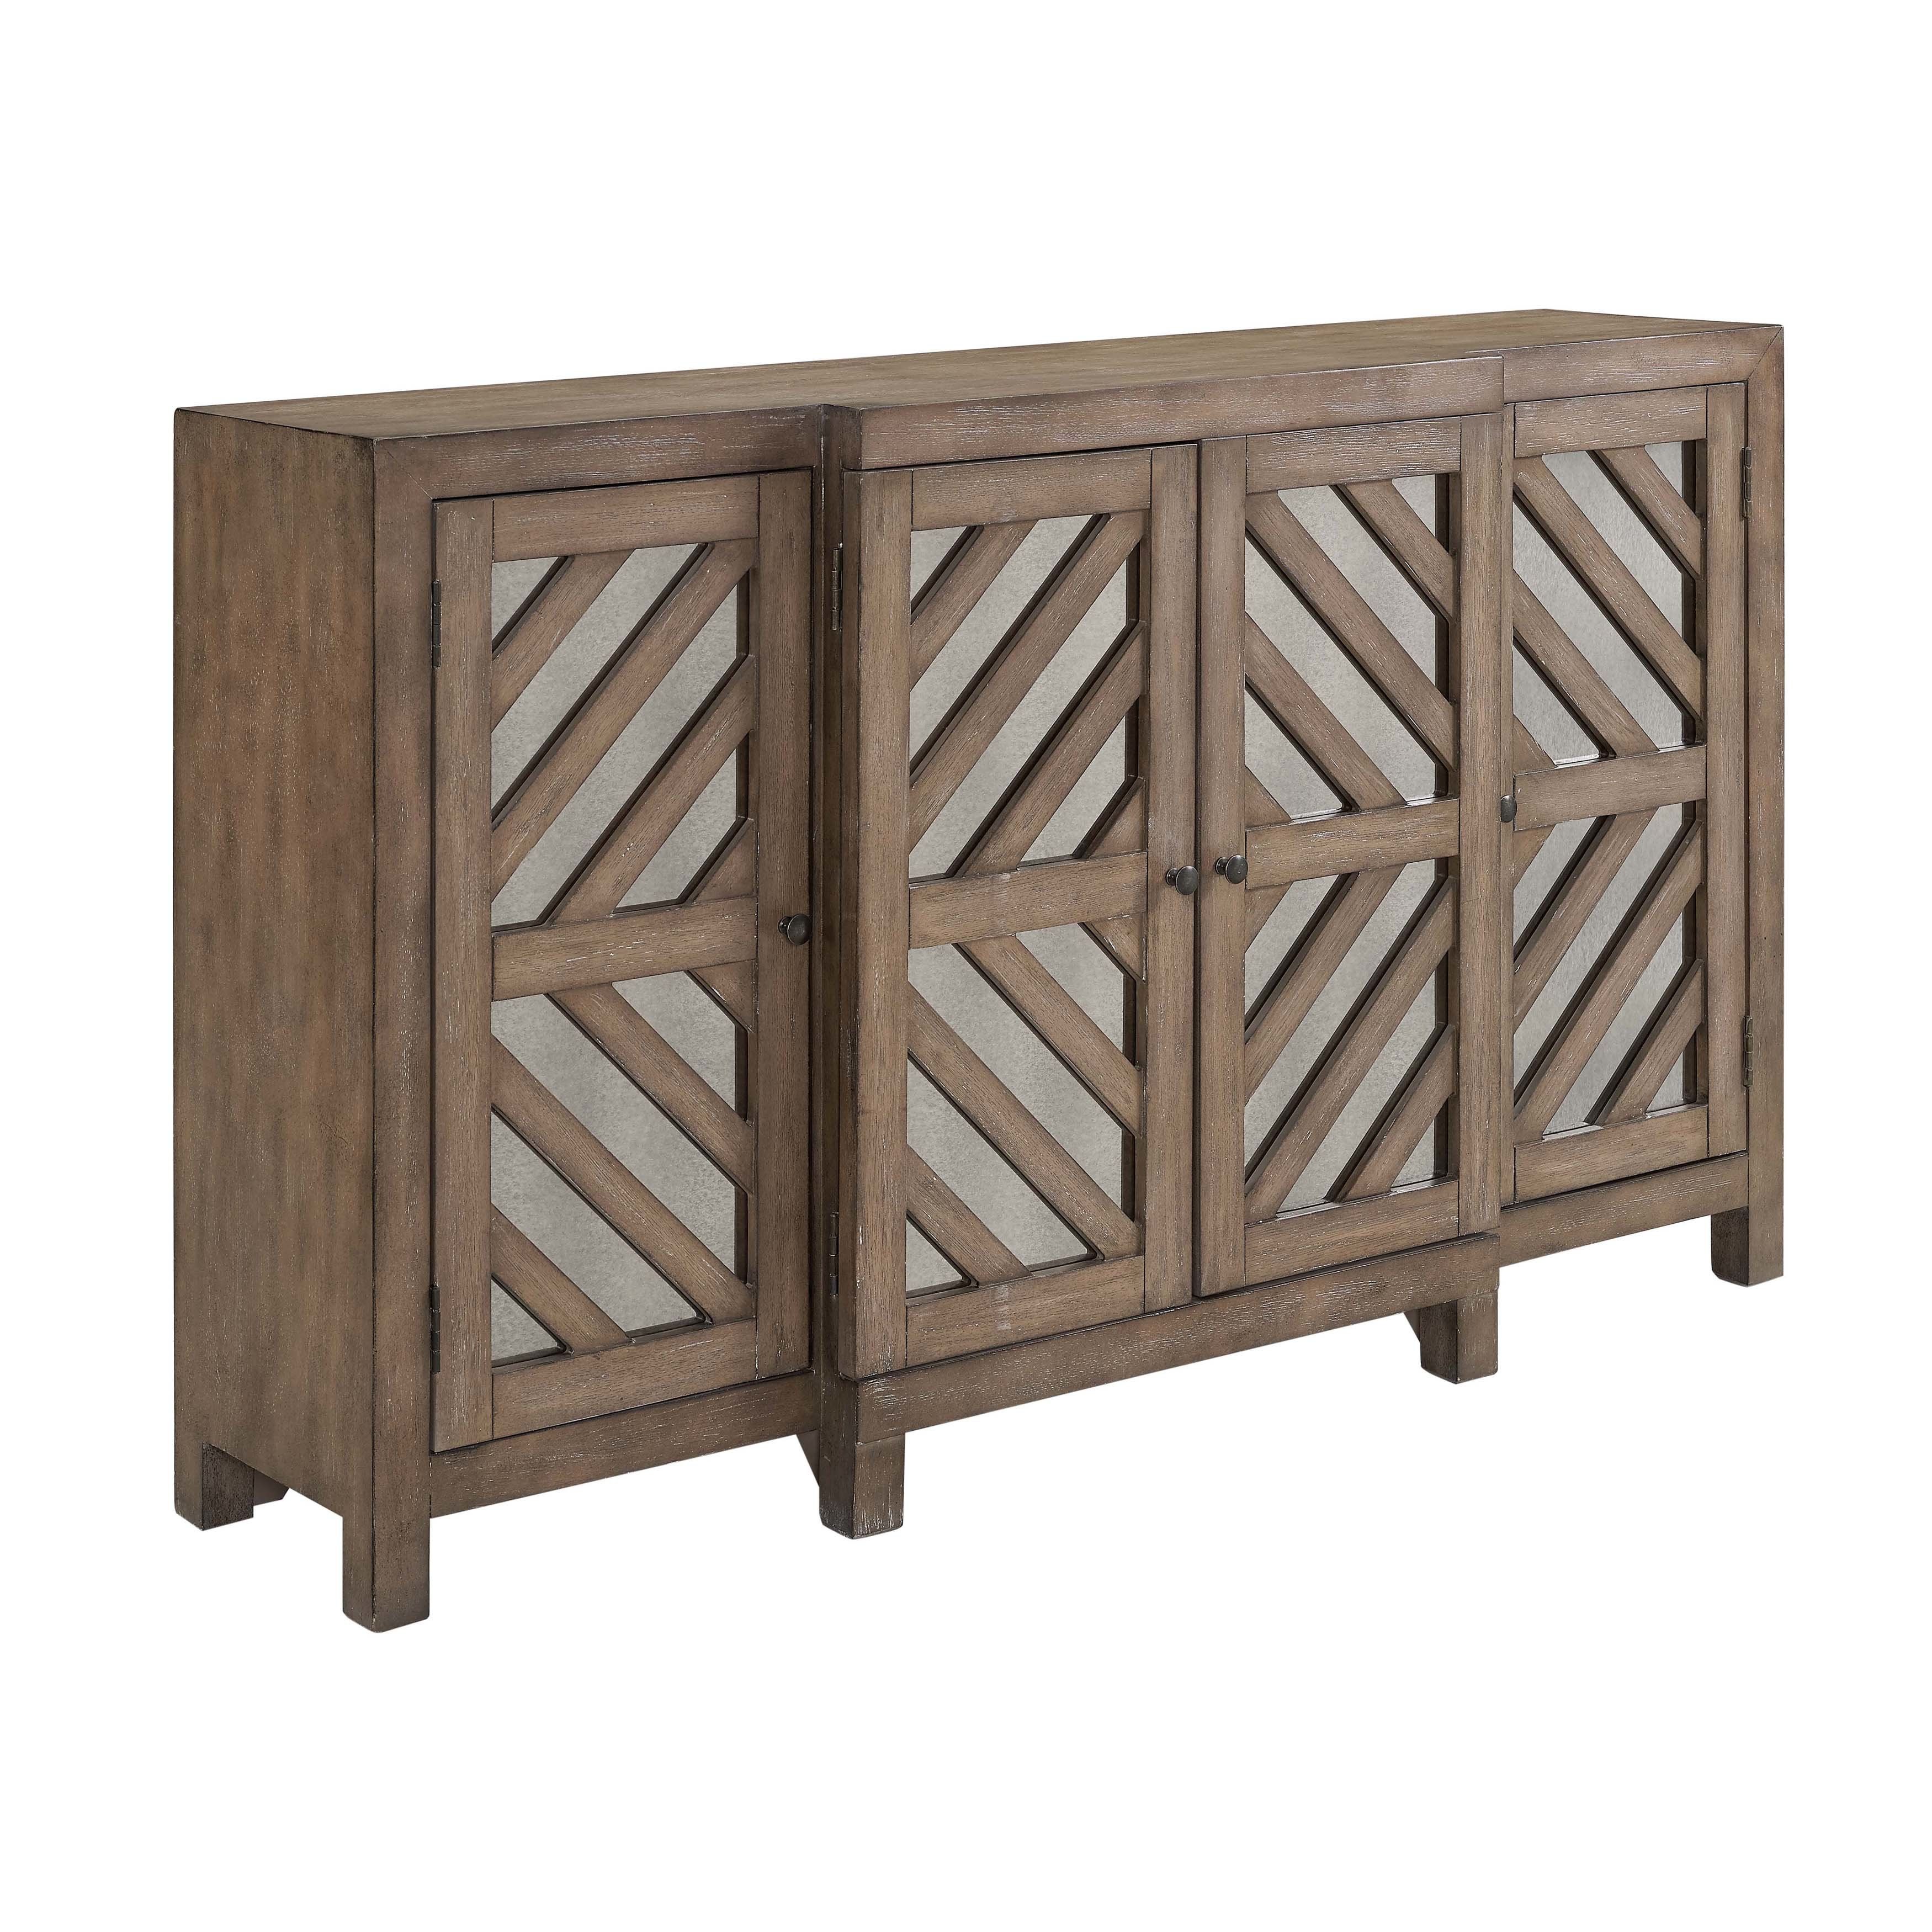 Farmhouse & Rustic Sideboards & Buffets | Birch Lane With Regard To 2 Shelf Buffets With Curved Legs (View 18 of 30)